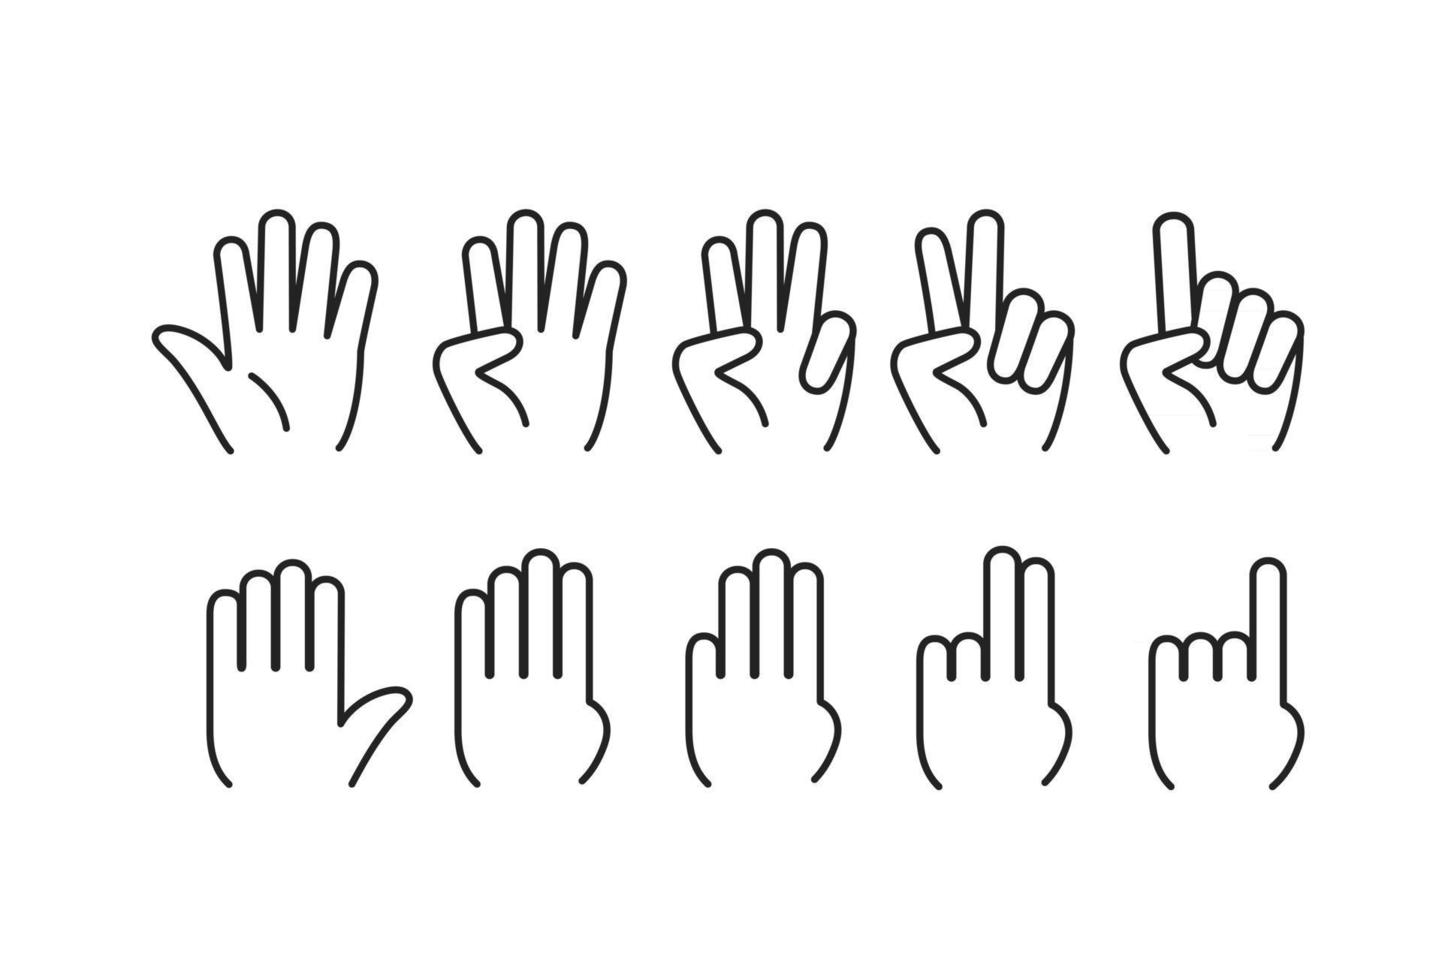 Human gestures silhouettes Count down vector clipart